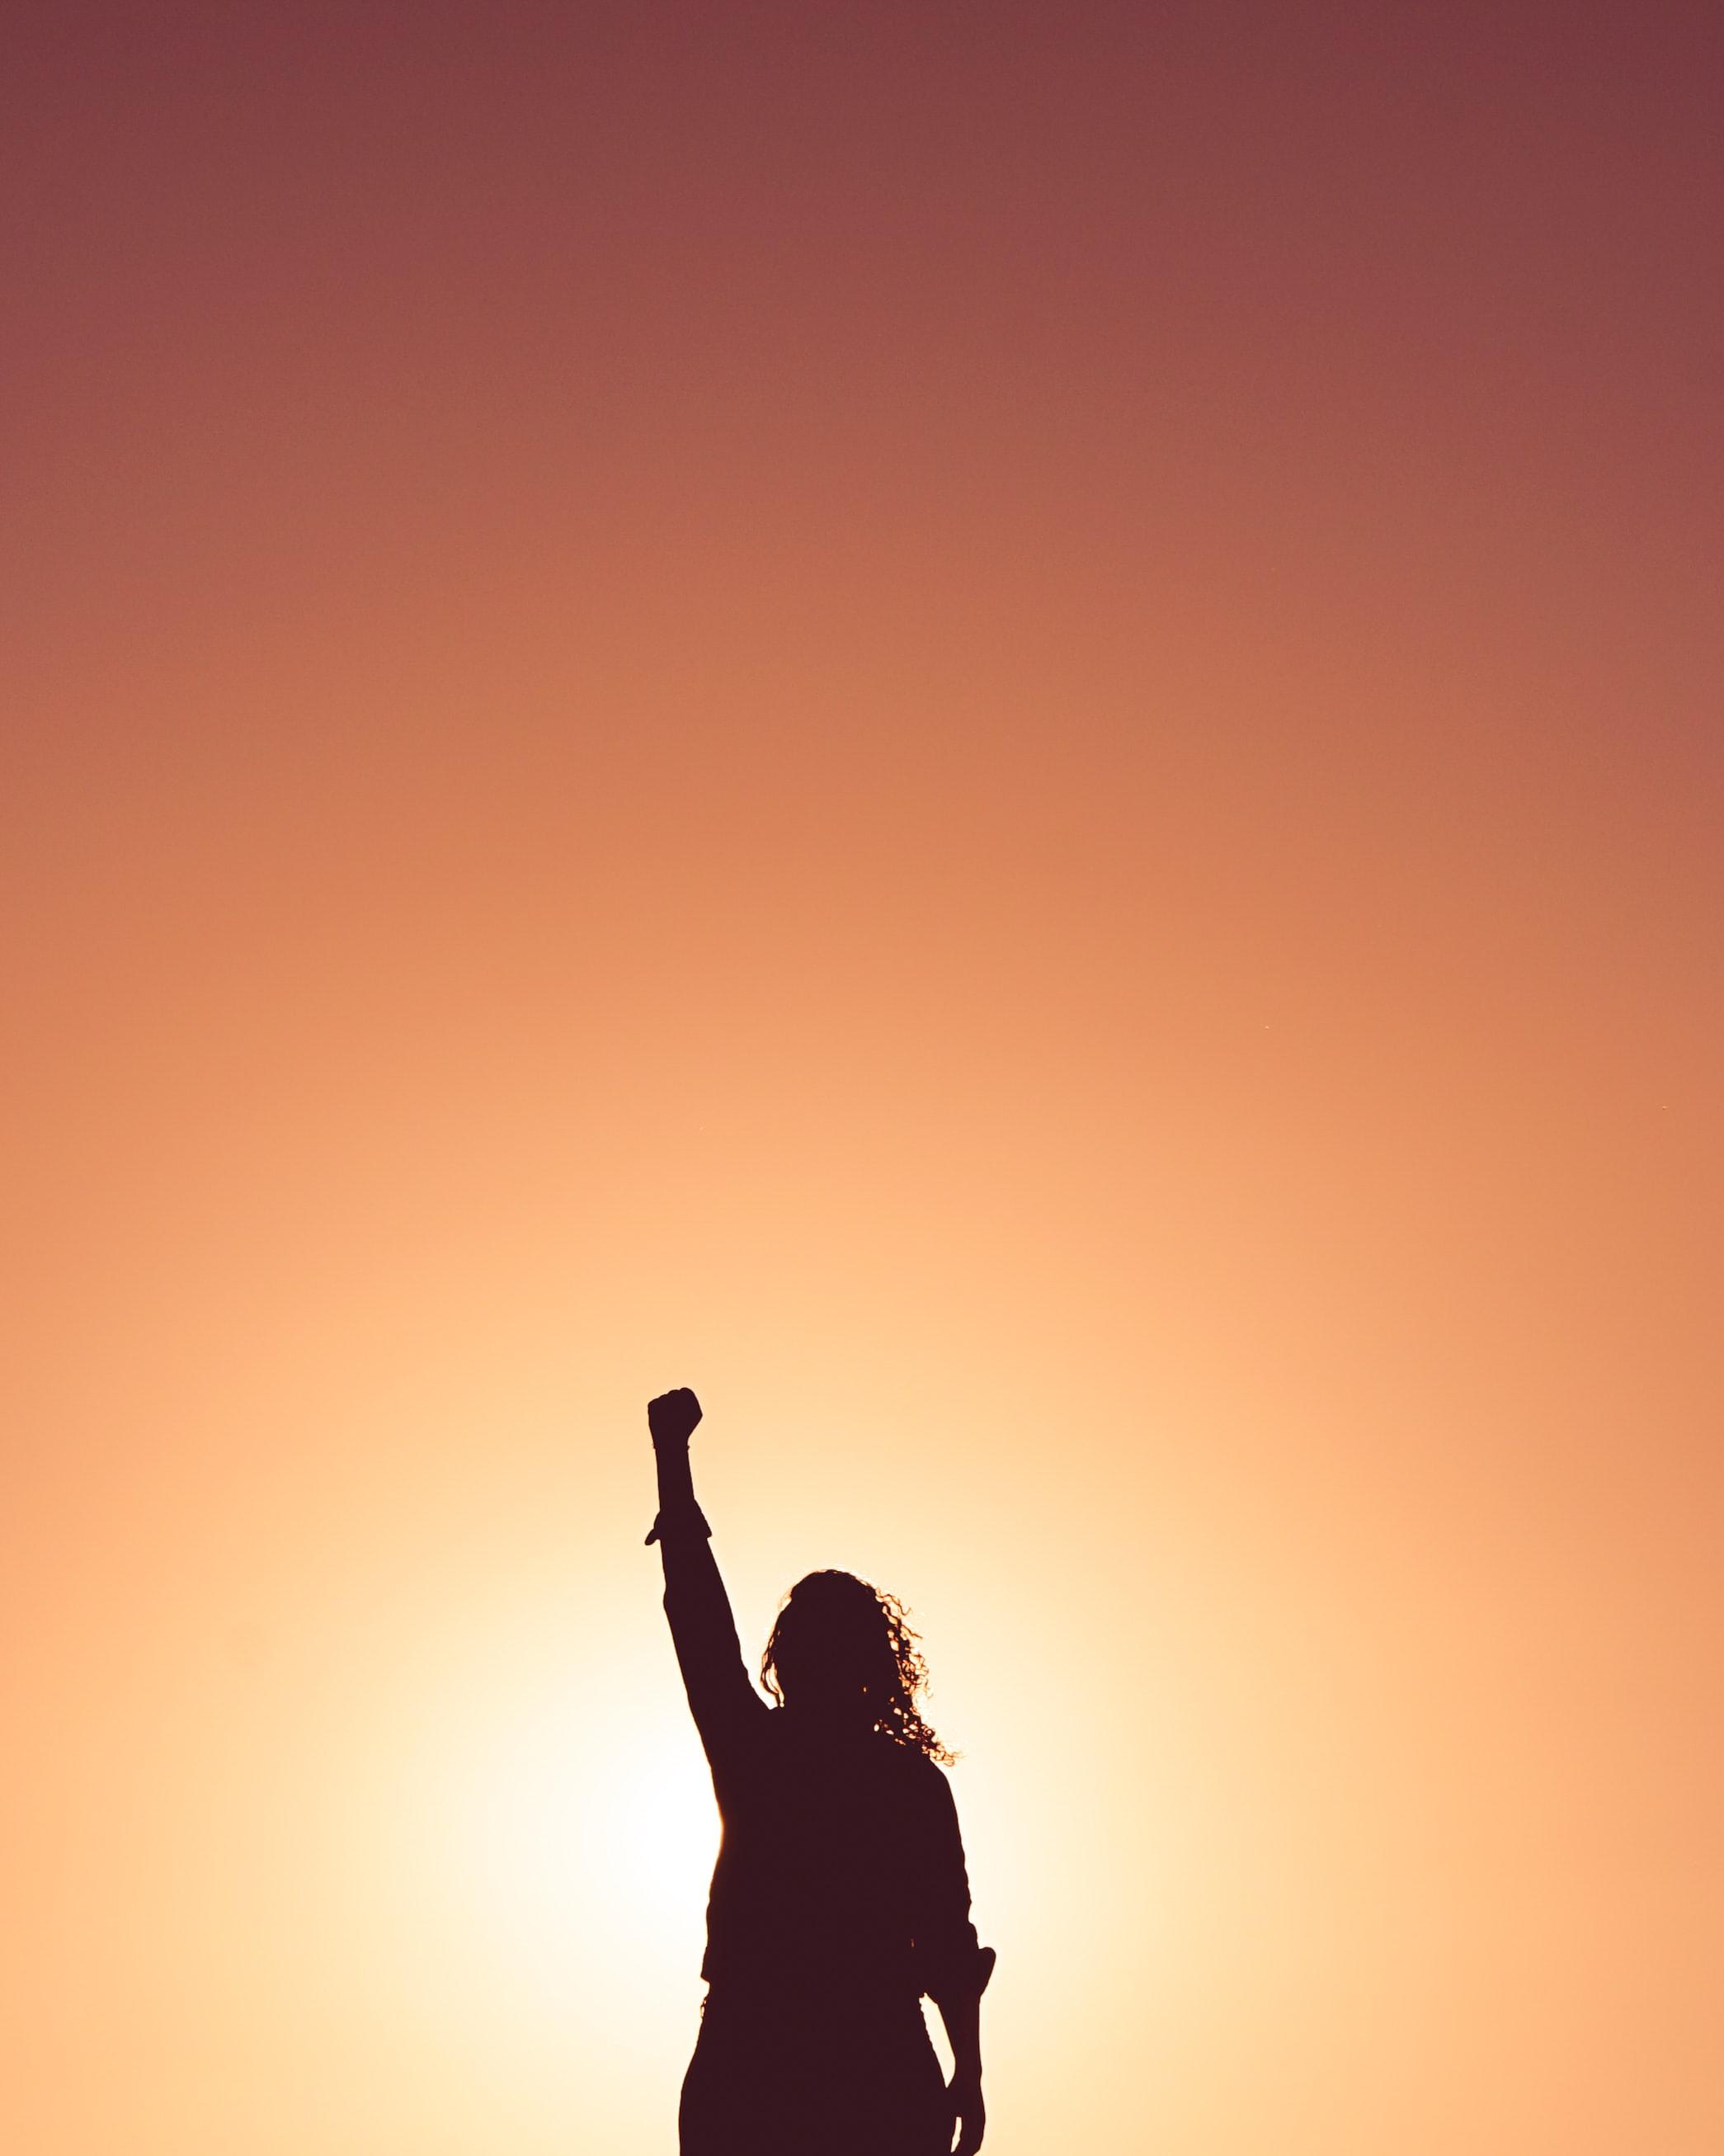 The silhouette of a woman standing with her fist in the air, backlit by a sunset